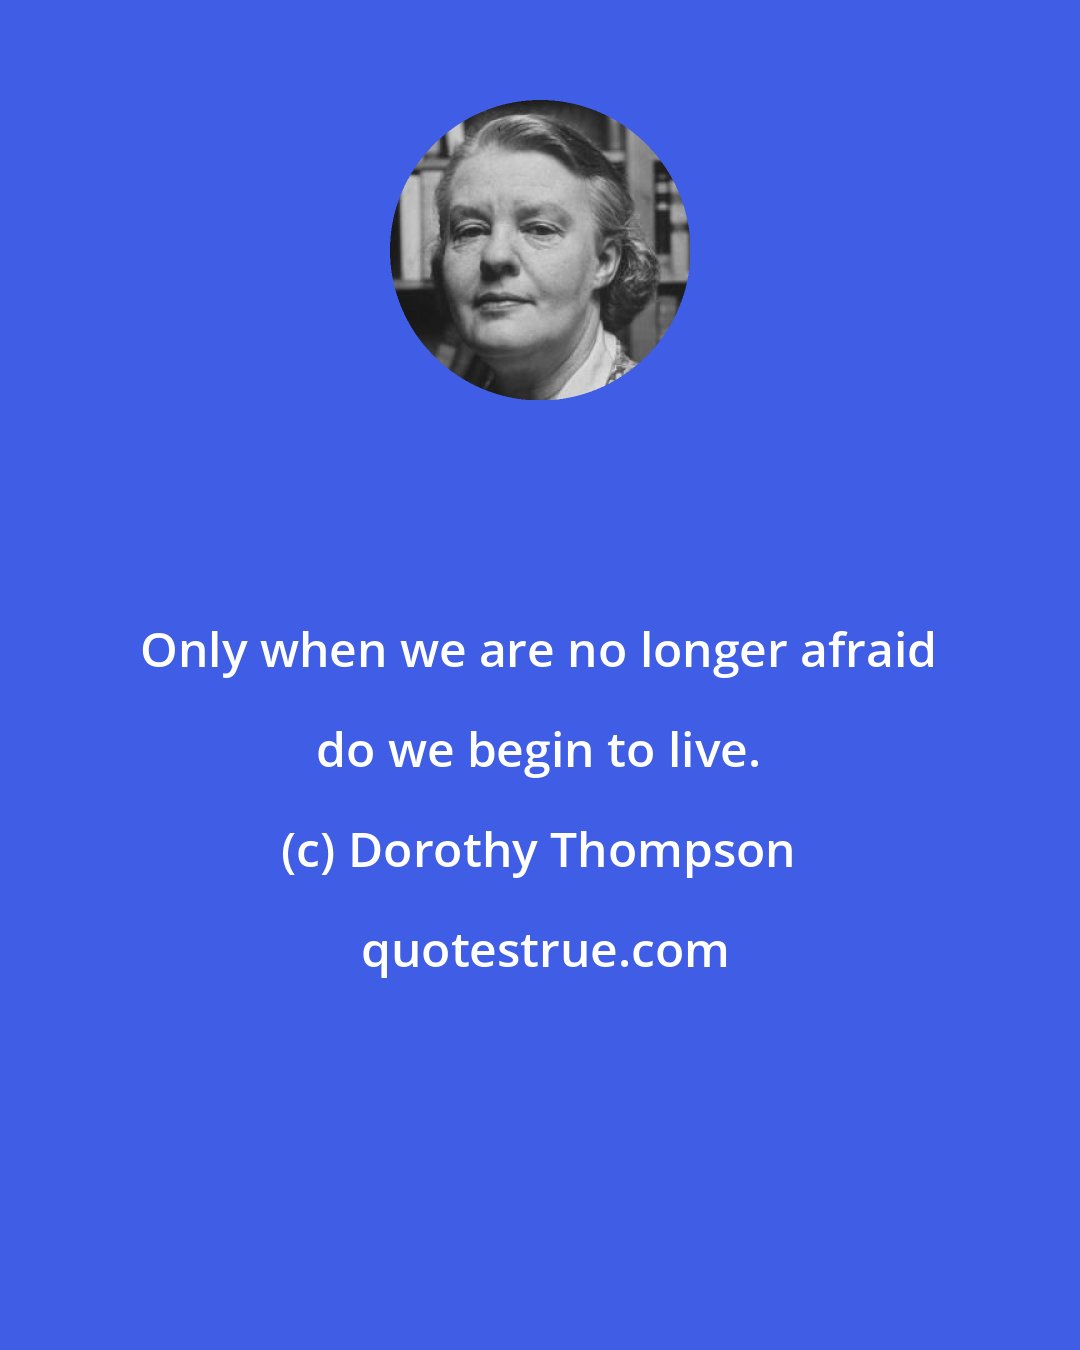 Dorothy Thompson: Only when we are no longer afraid do we begin to live.